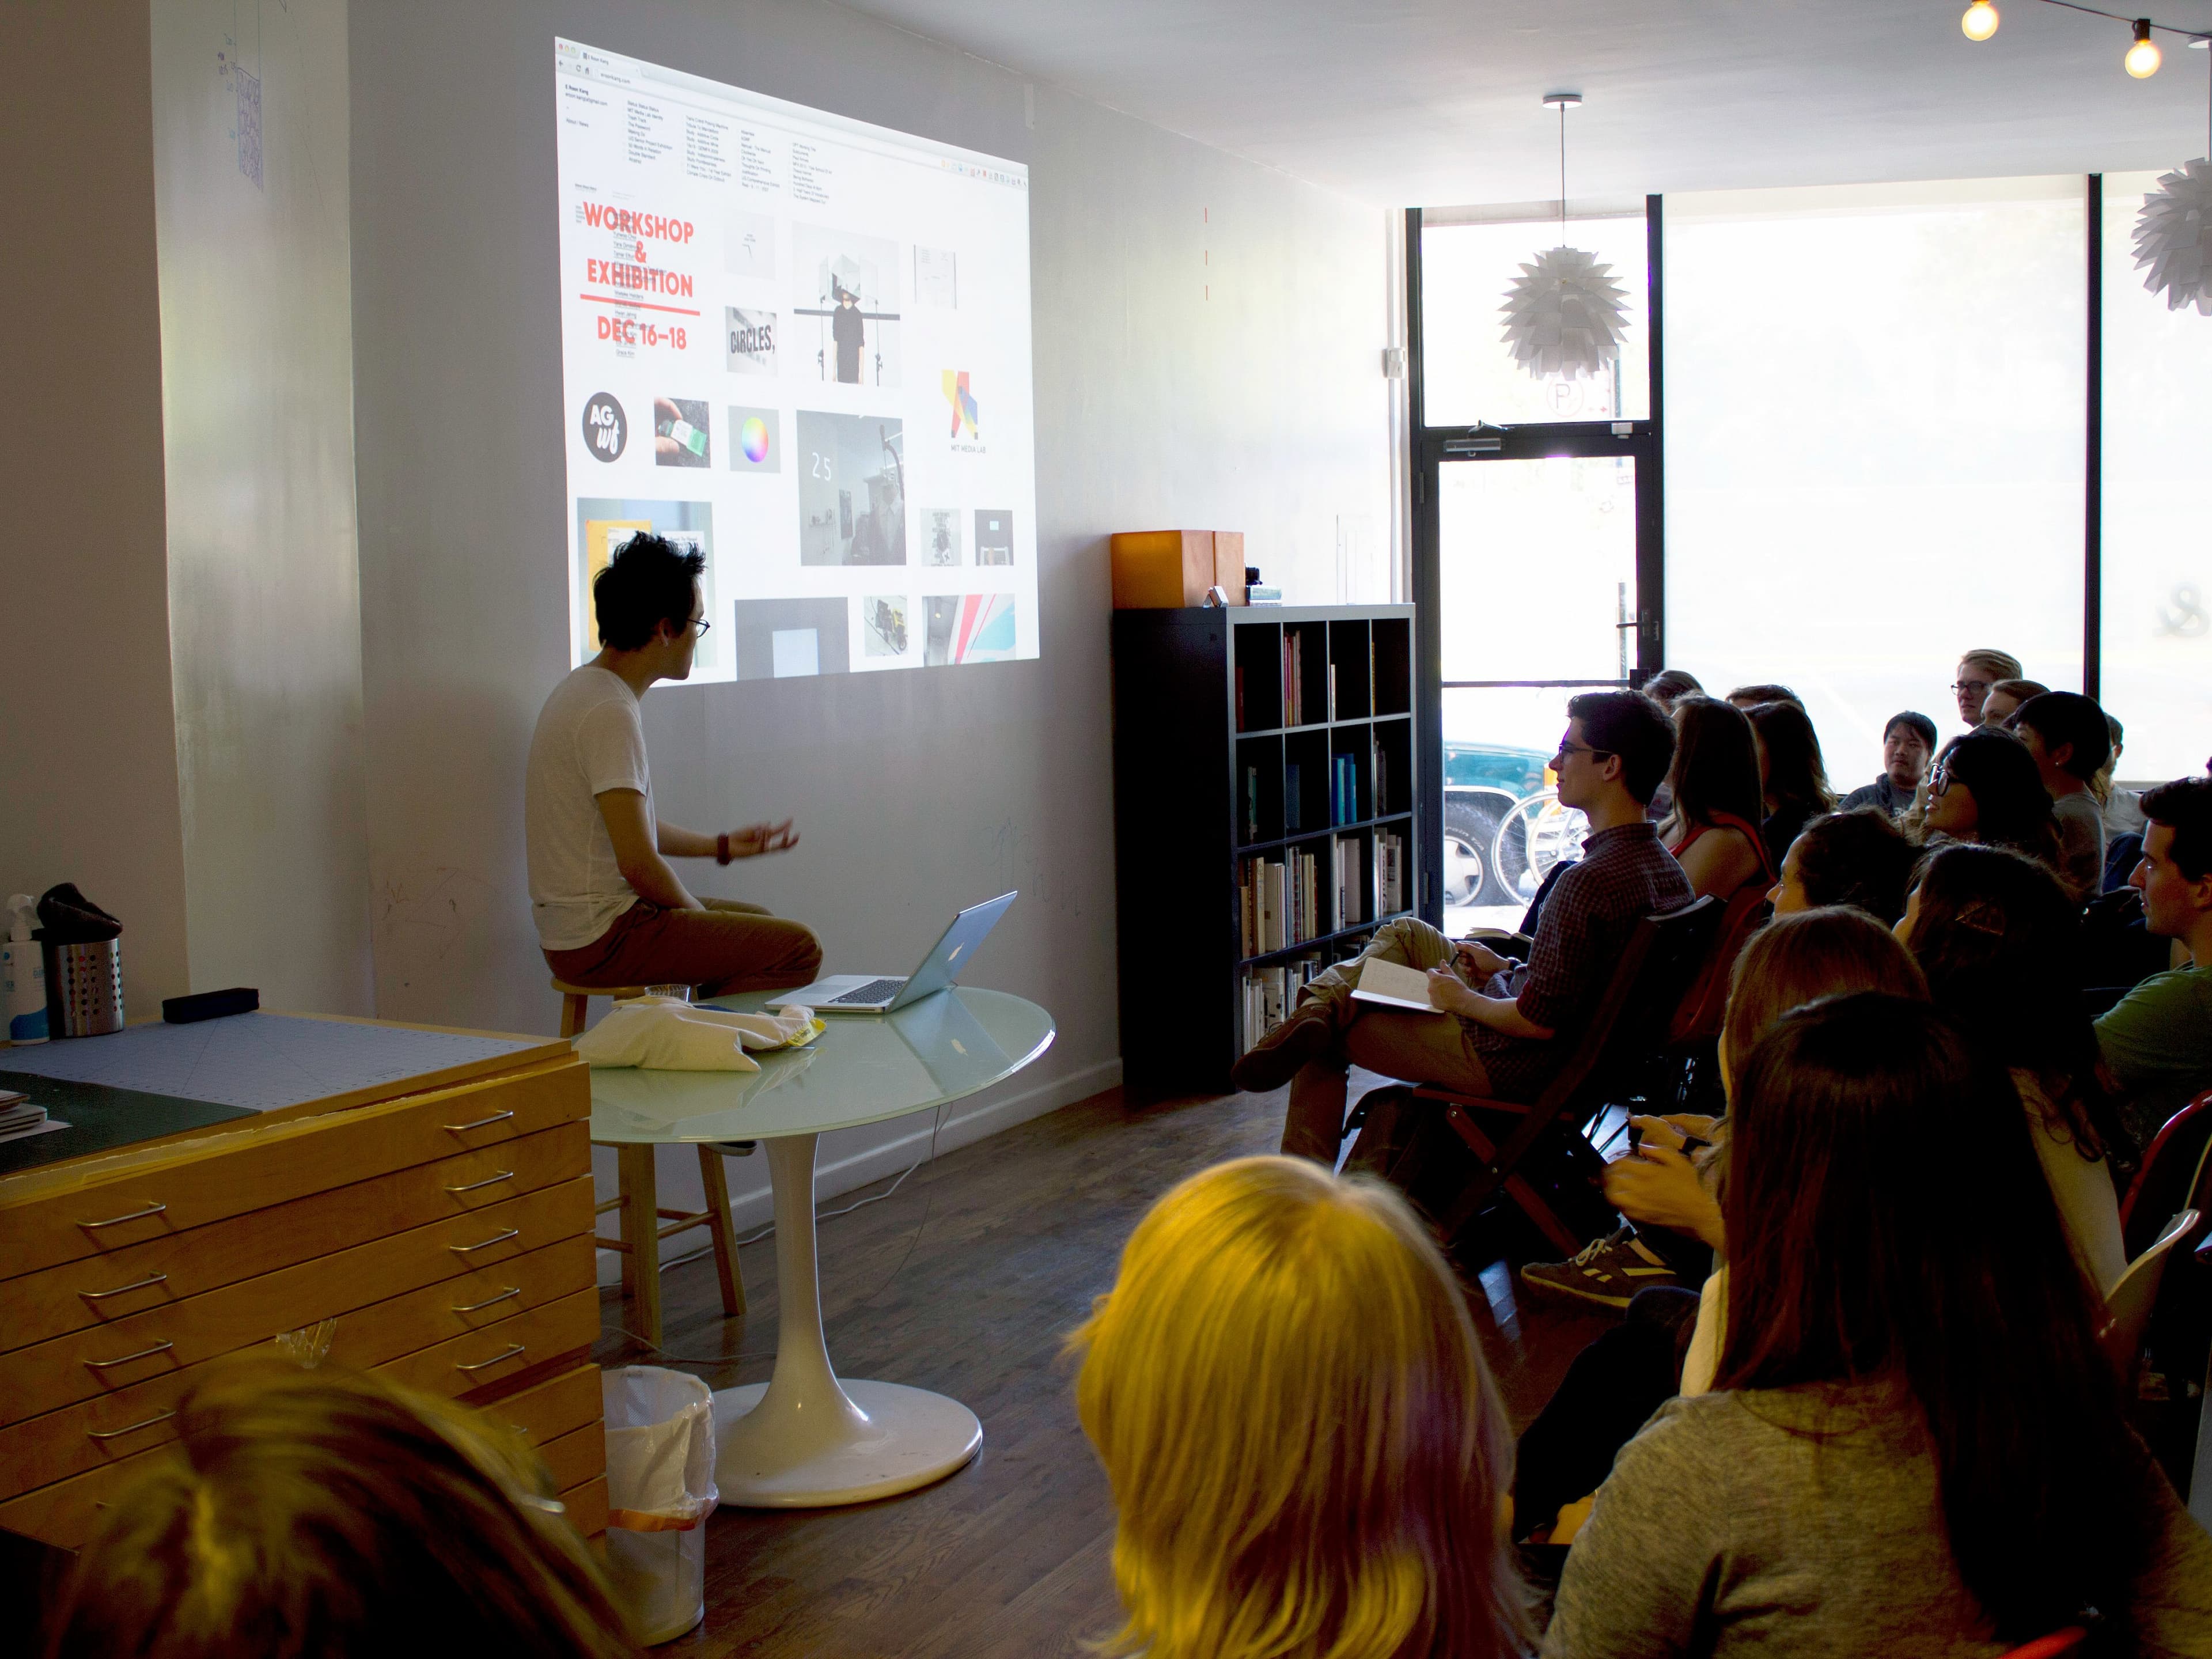 A person sits on a table, presenting slides to an attentive audience in a modern, brightly lit room. The slides are projected onto a white wall and include various images and text. The audience consists of people seated in chairs, facing the presenter.